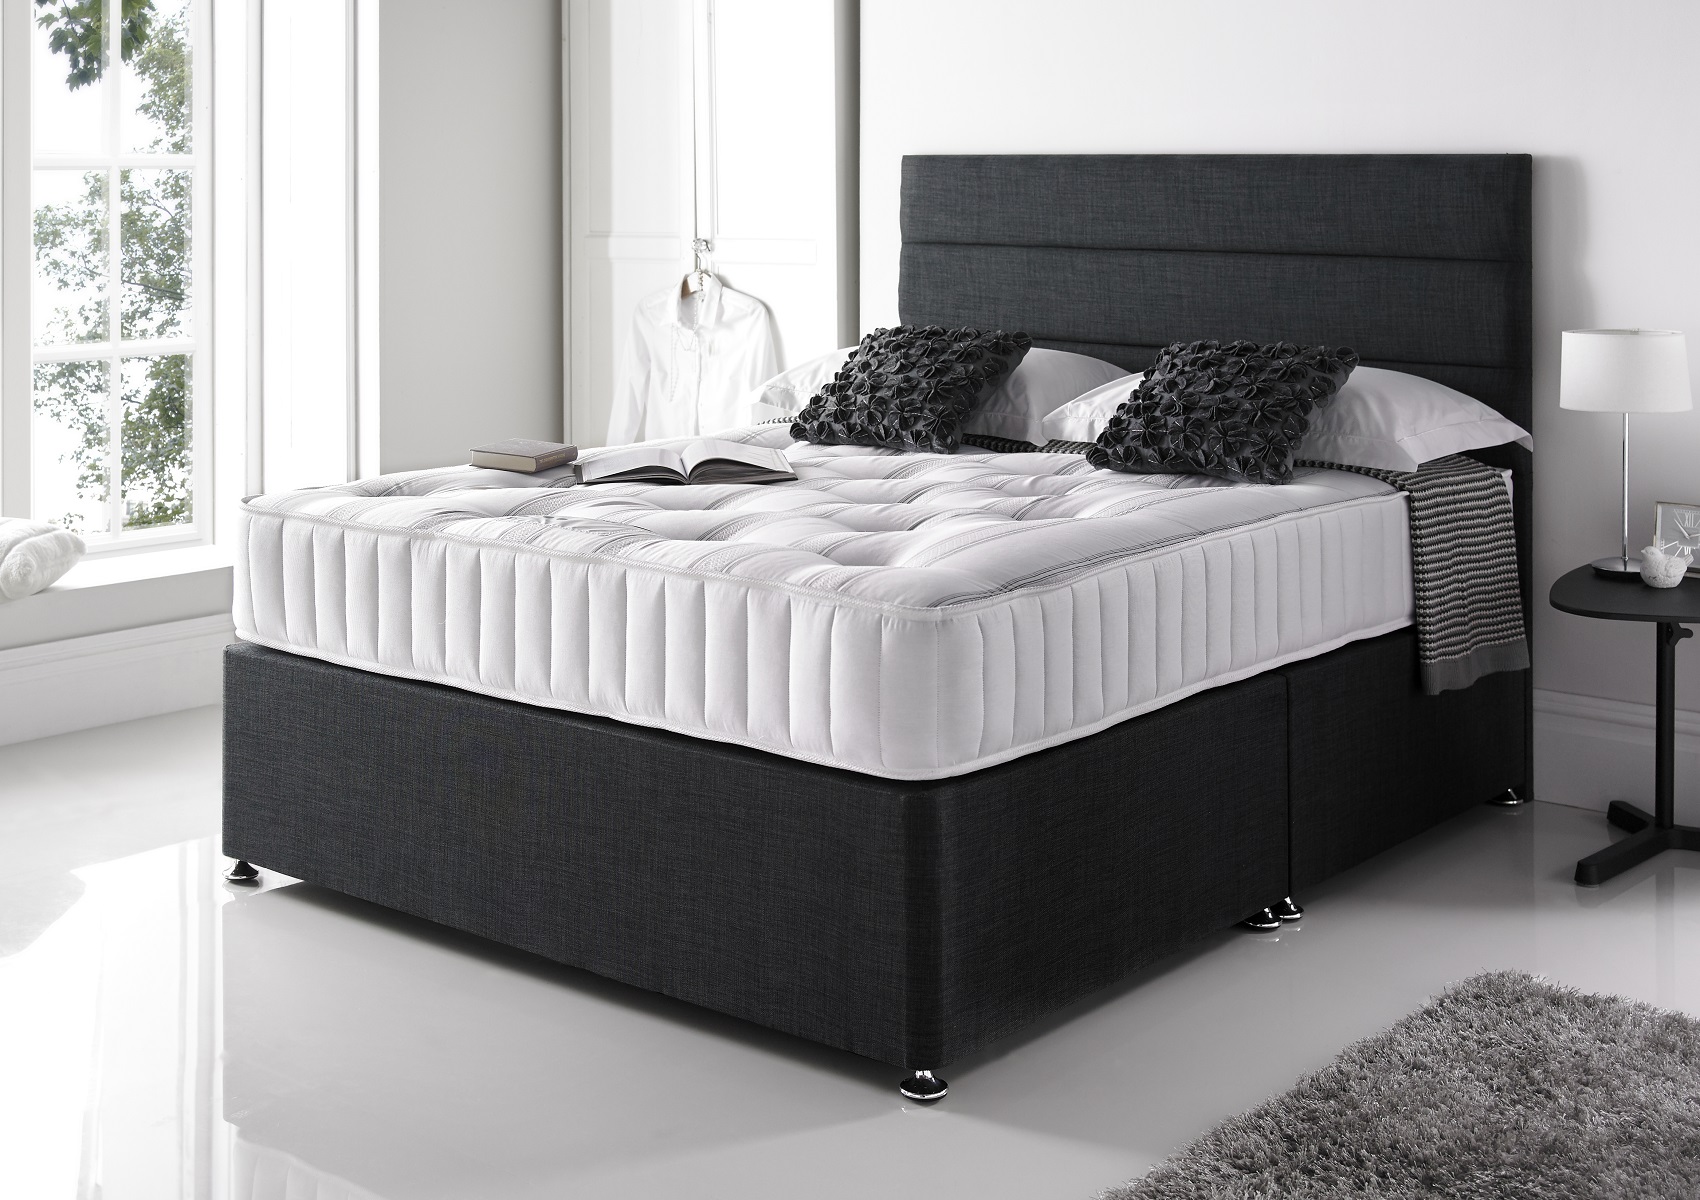 View Essentials Charcoal Upholstered Single Divan Bed Time4Sleep information